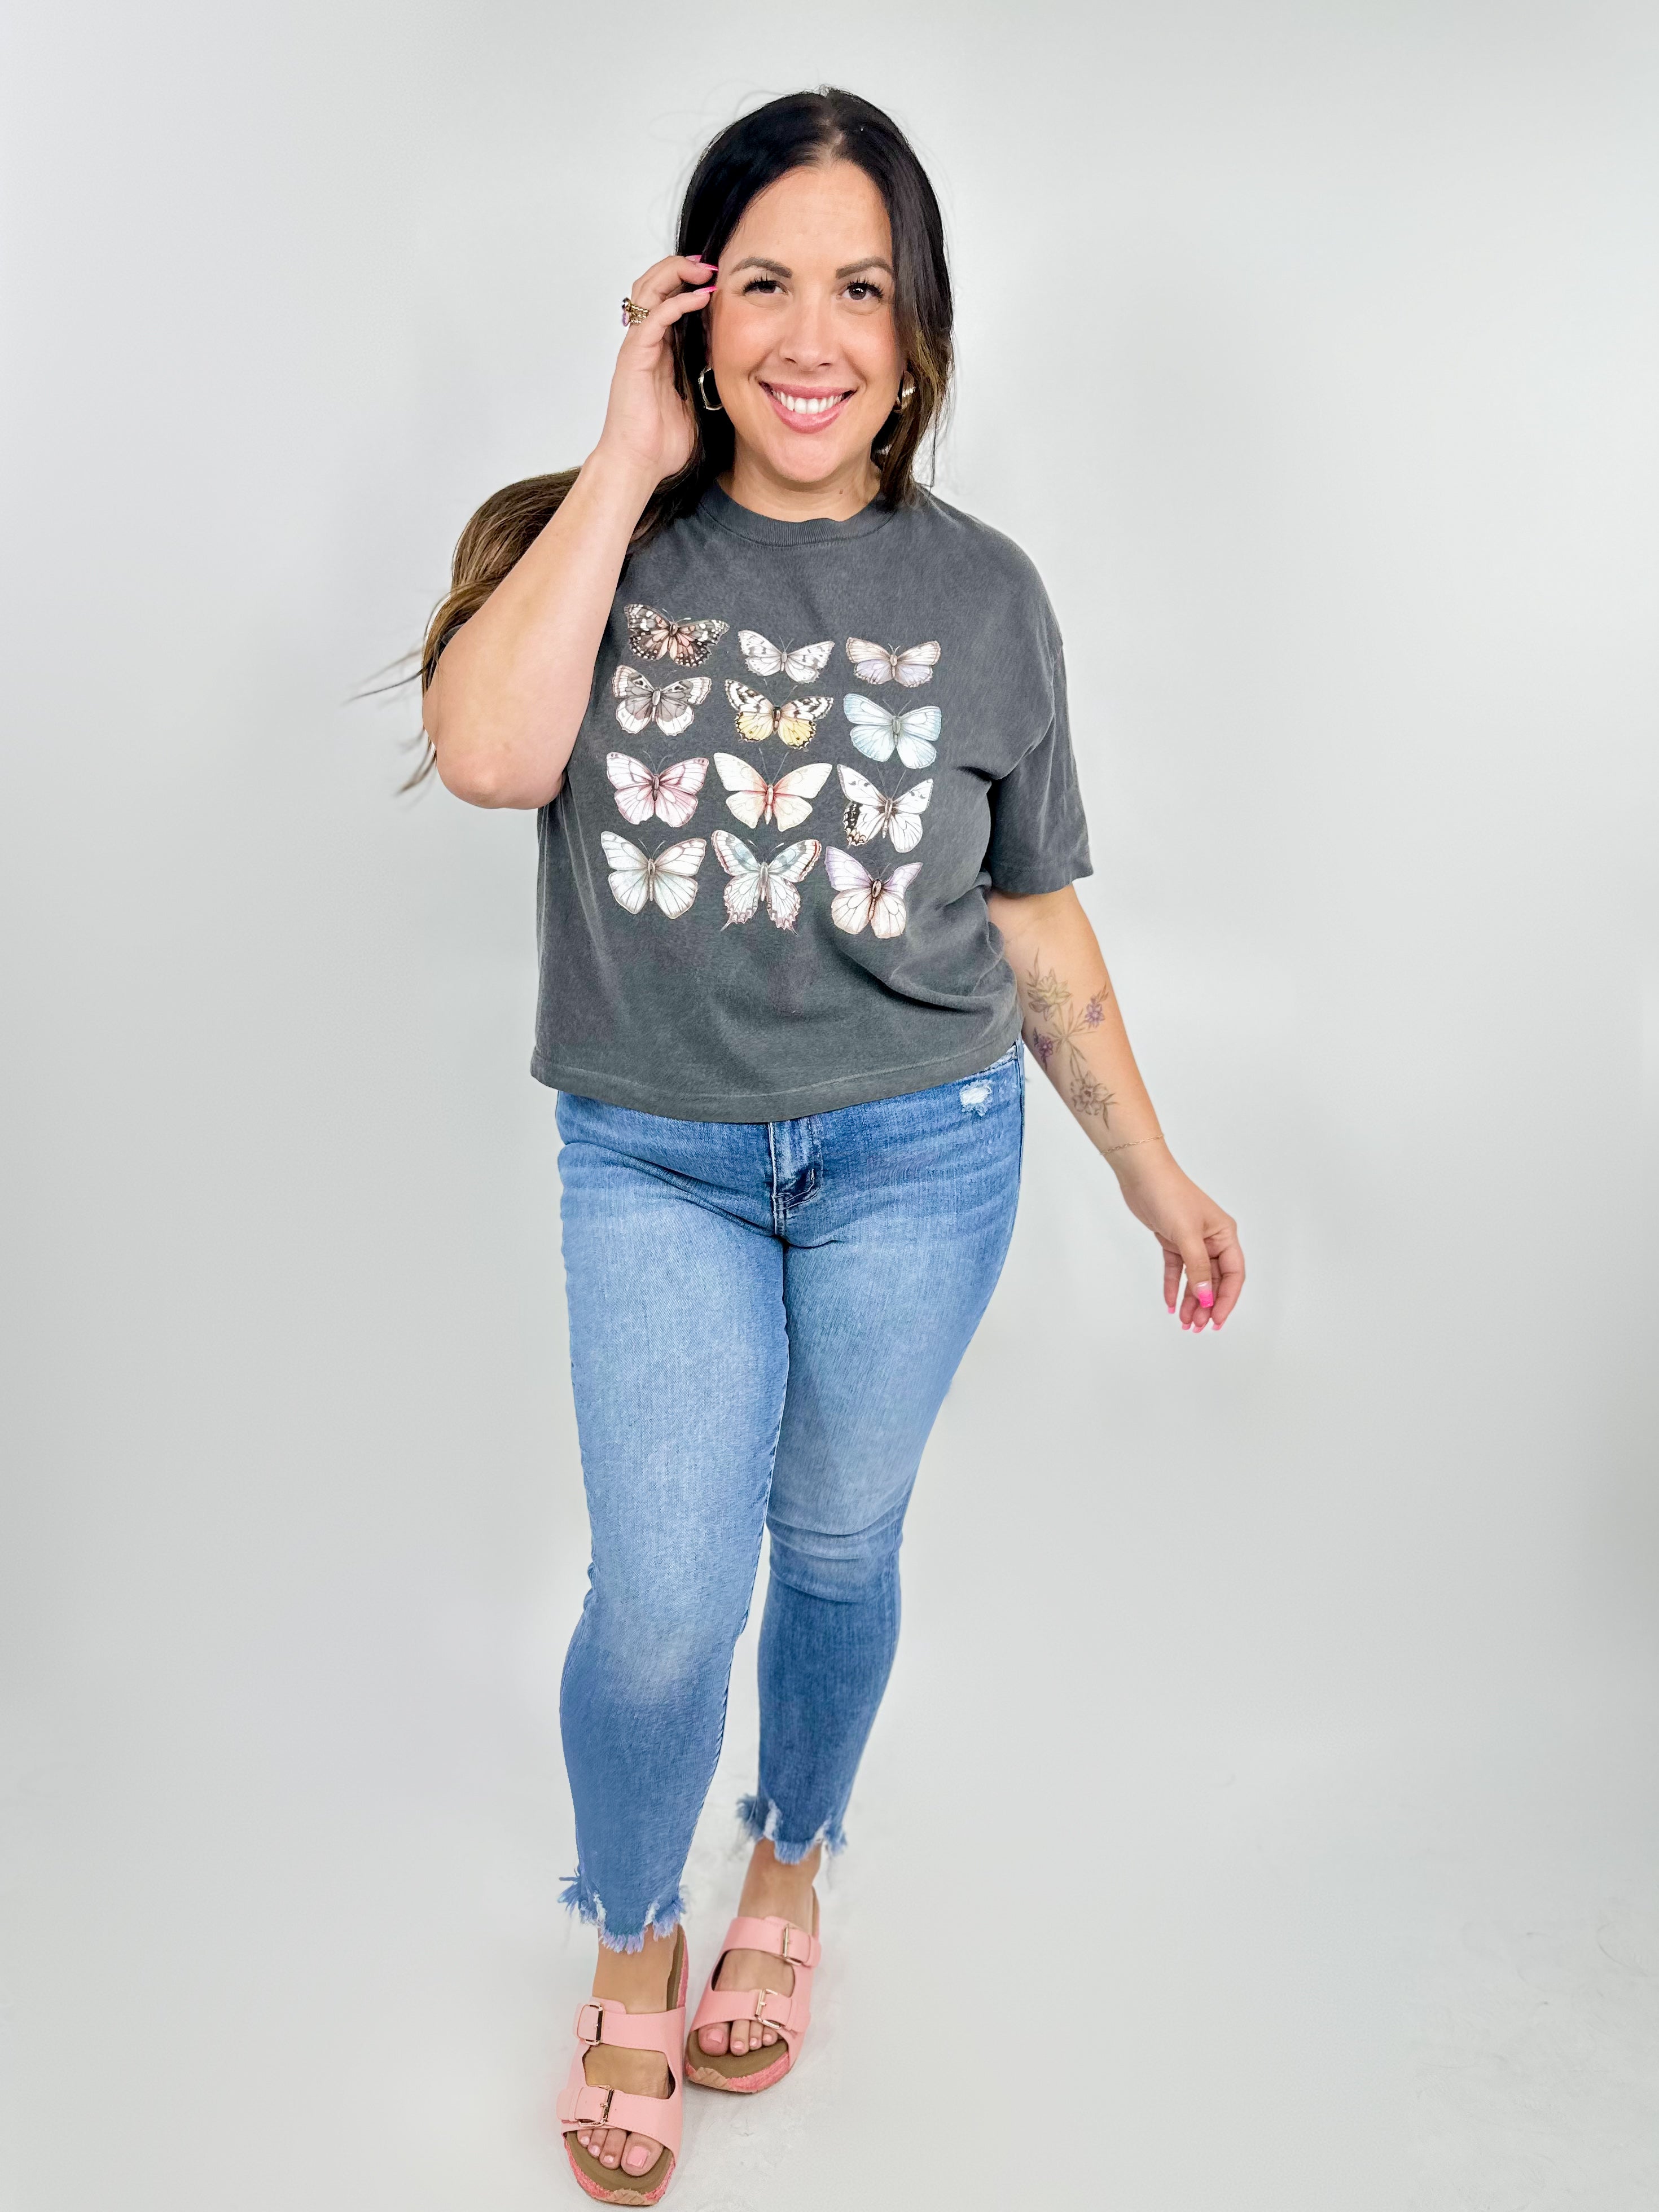 Pastel Butterflies Graphic Boxy Tee-130 Graphic Tees-Heathered Boho-Heathered Boho Boutique, Women's Fashion and Accessories in Palmetto, FL